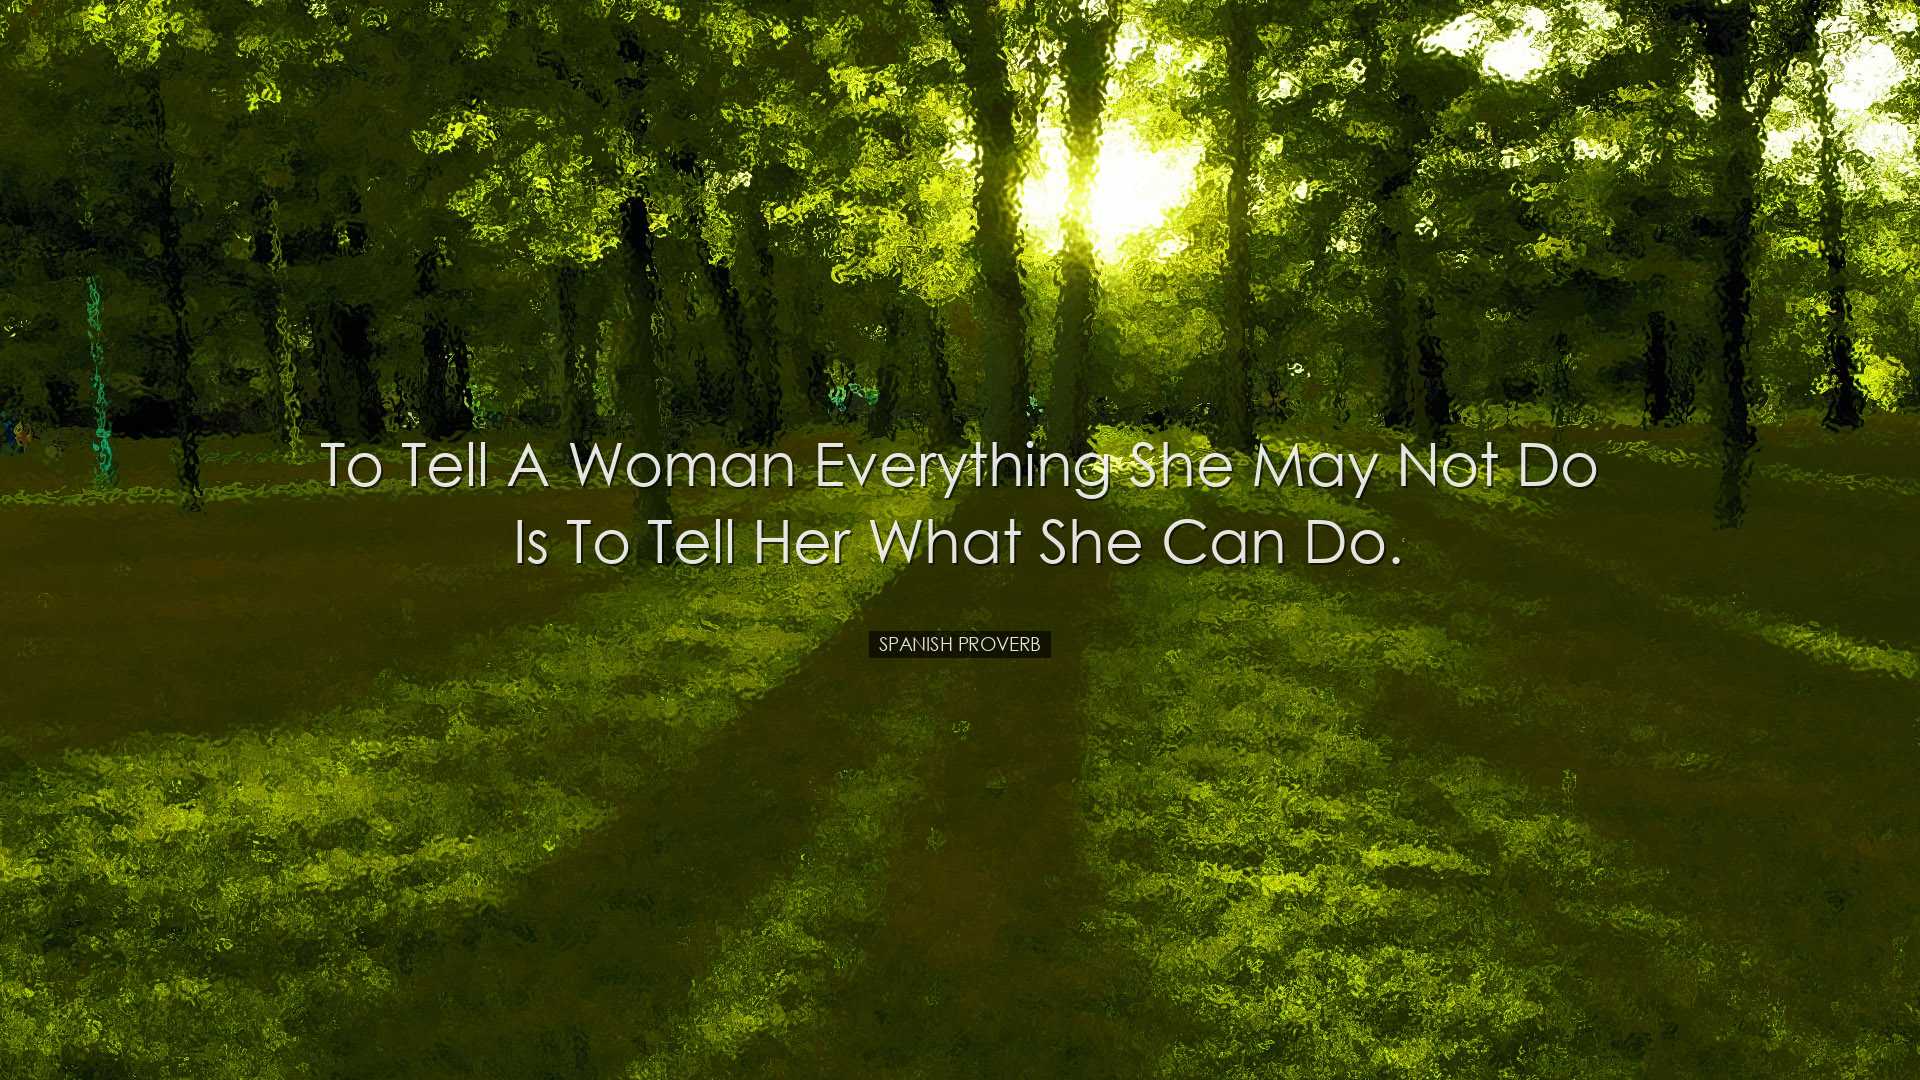 To tell a woman everything she may not do is to tell her what she